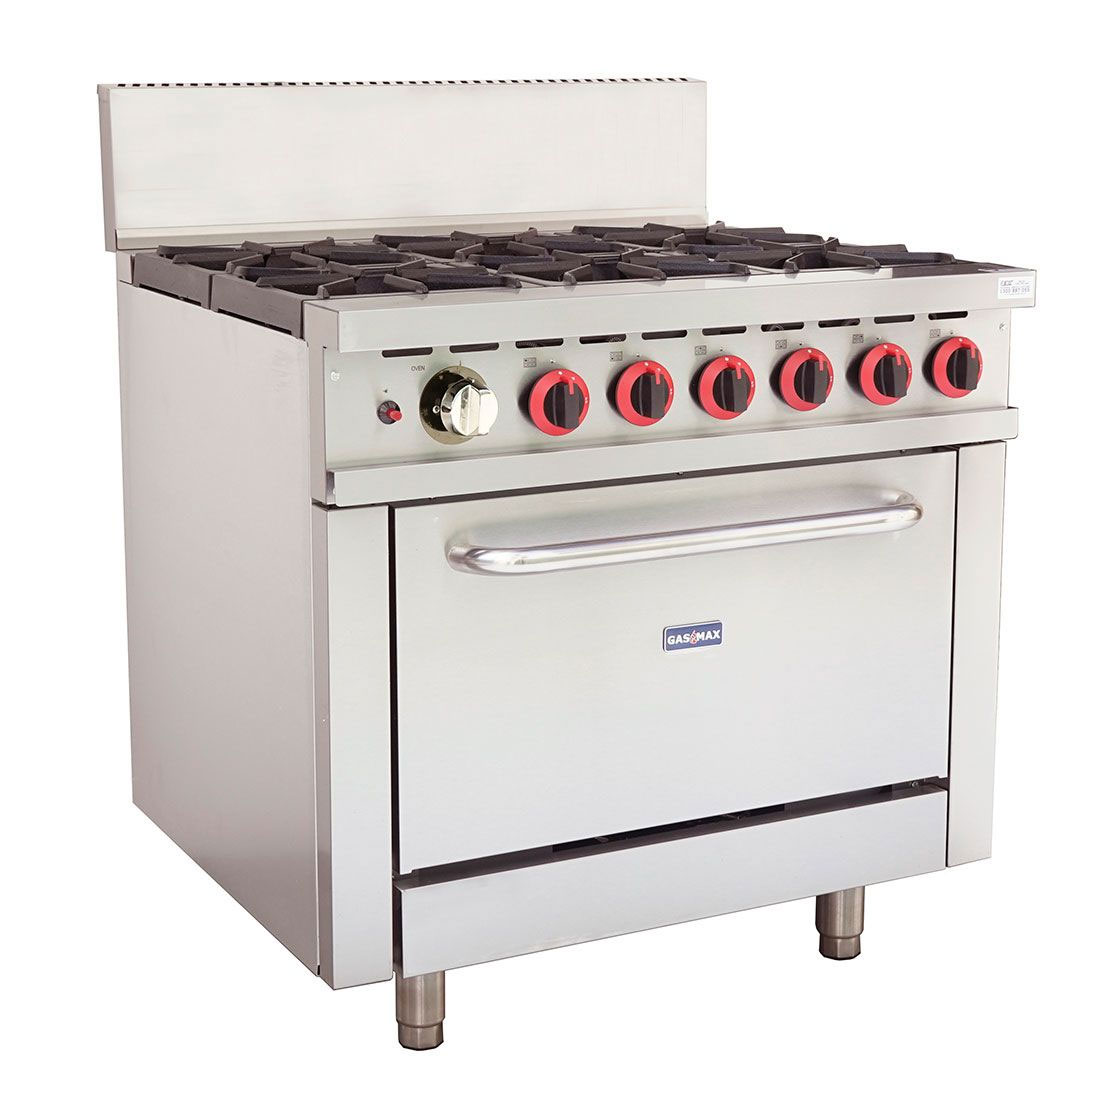 GBS6TLPG Gasmax 6 Burner With Oven Flame Failure